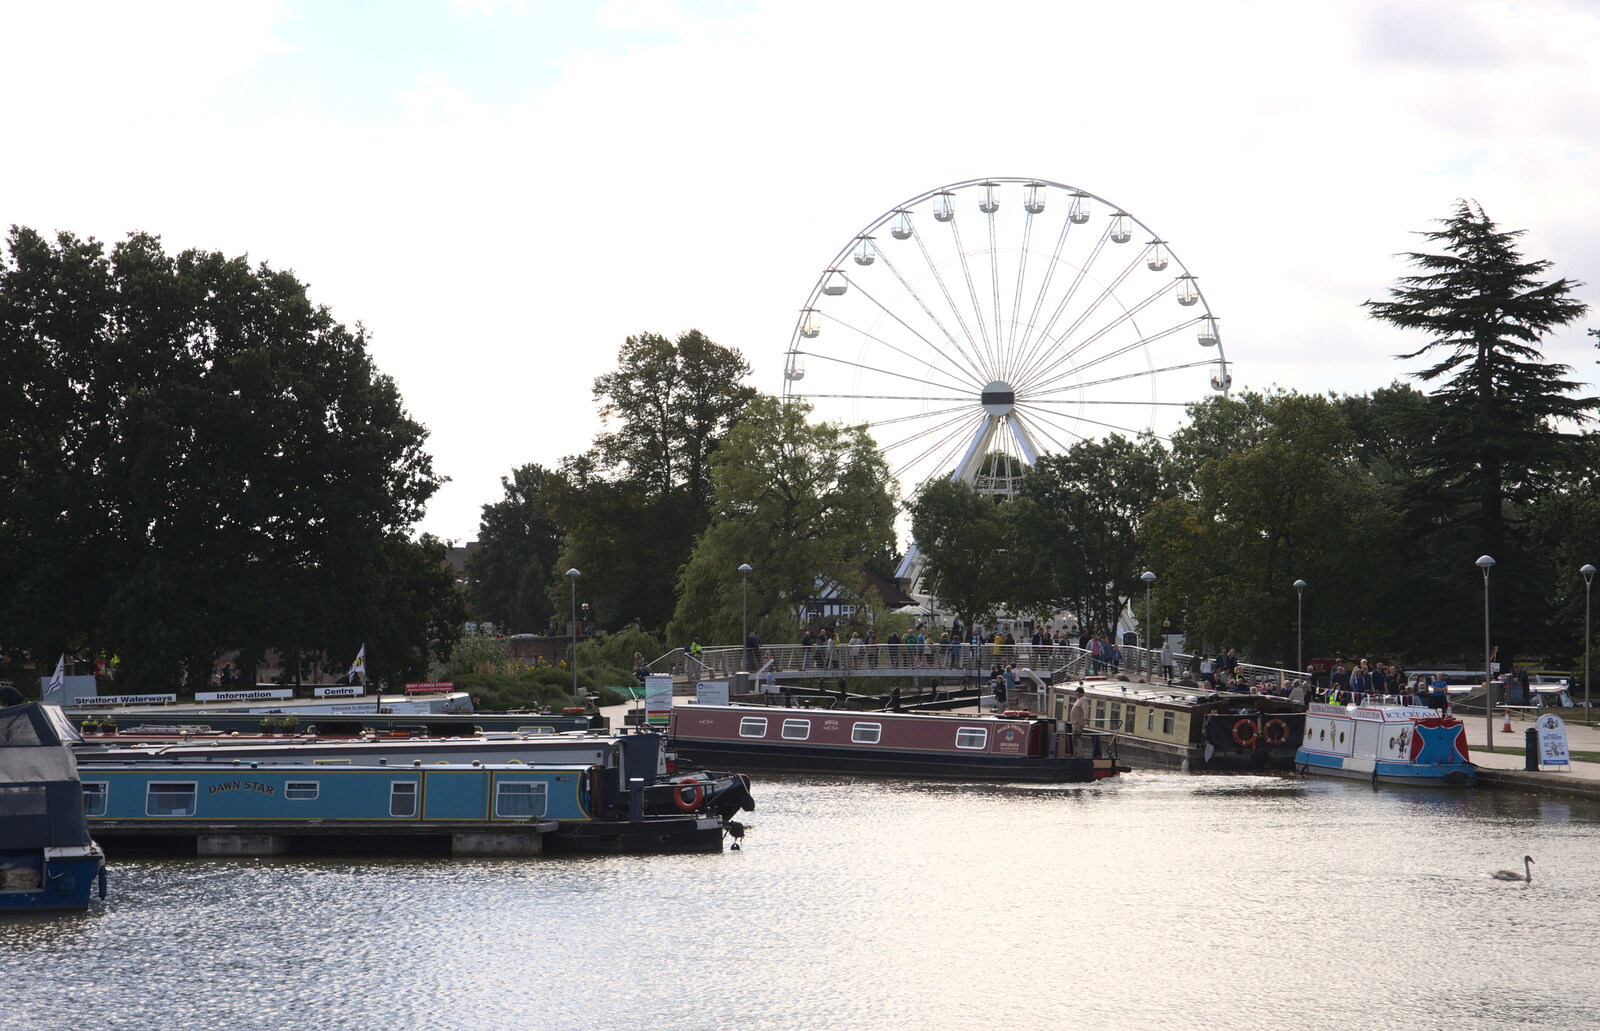 Long boats and a ferris wheel from A Postcard from Stratford-upon-Avon, Warwickshire - 9th September 2018